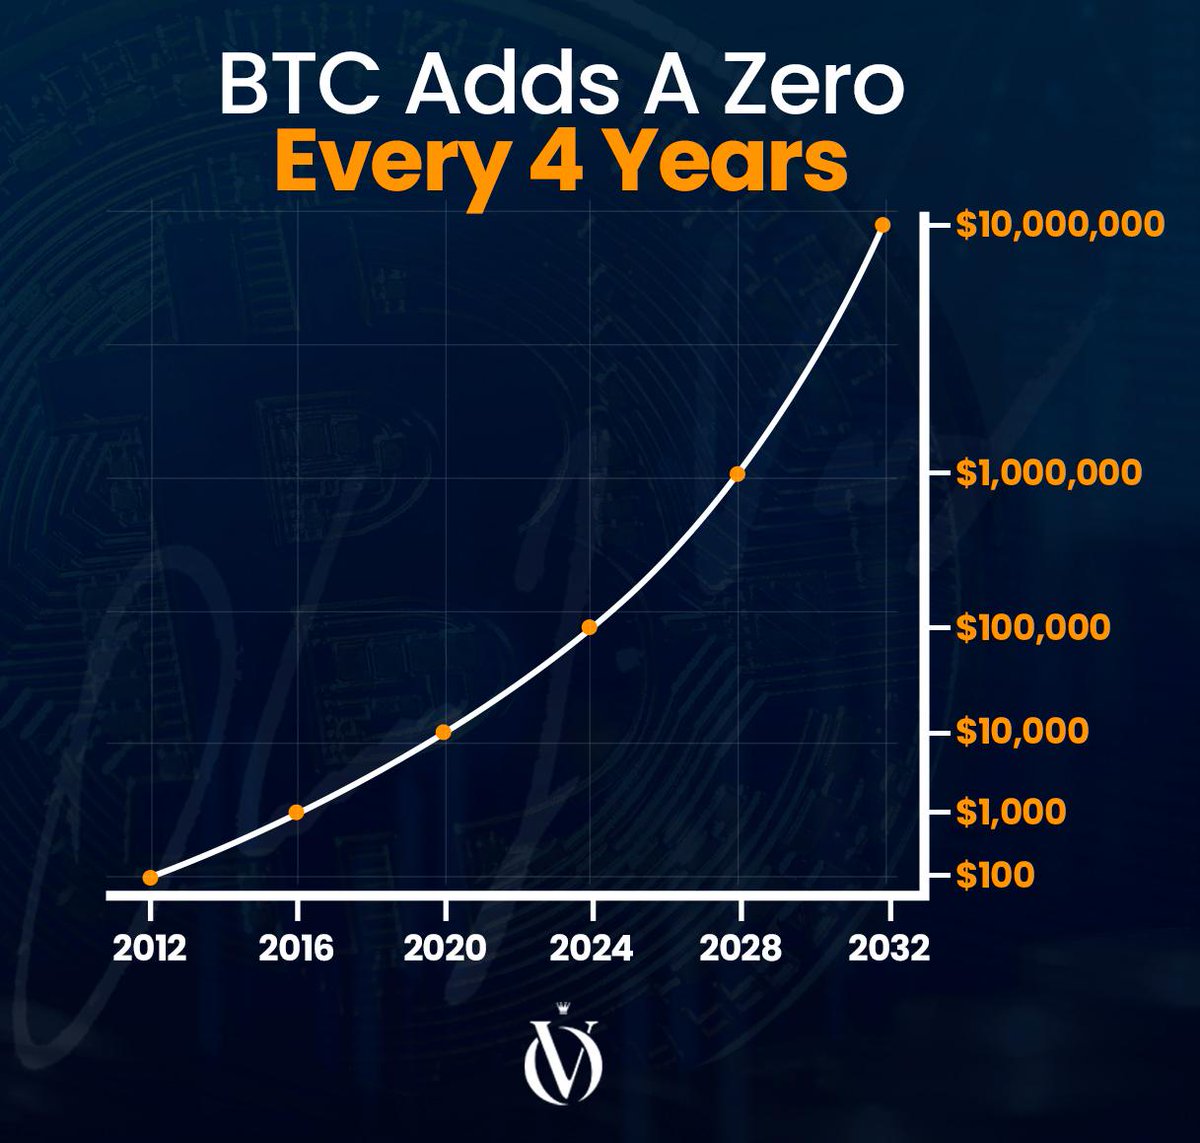 When someone tells you #Bitcoin is going to zero, tell them they couldn't be more correct. #Bitcoin is going to the next zero, and the next, and the next. It adds a zero after every 4-year halving event.

Should this continue, $10,000,000 #btc is hear shortly after 2032.